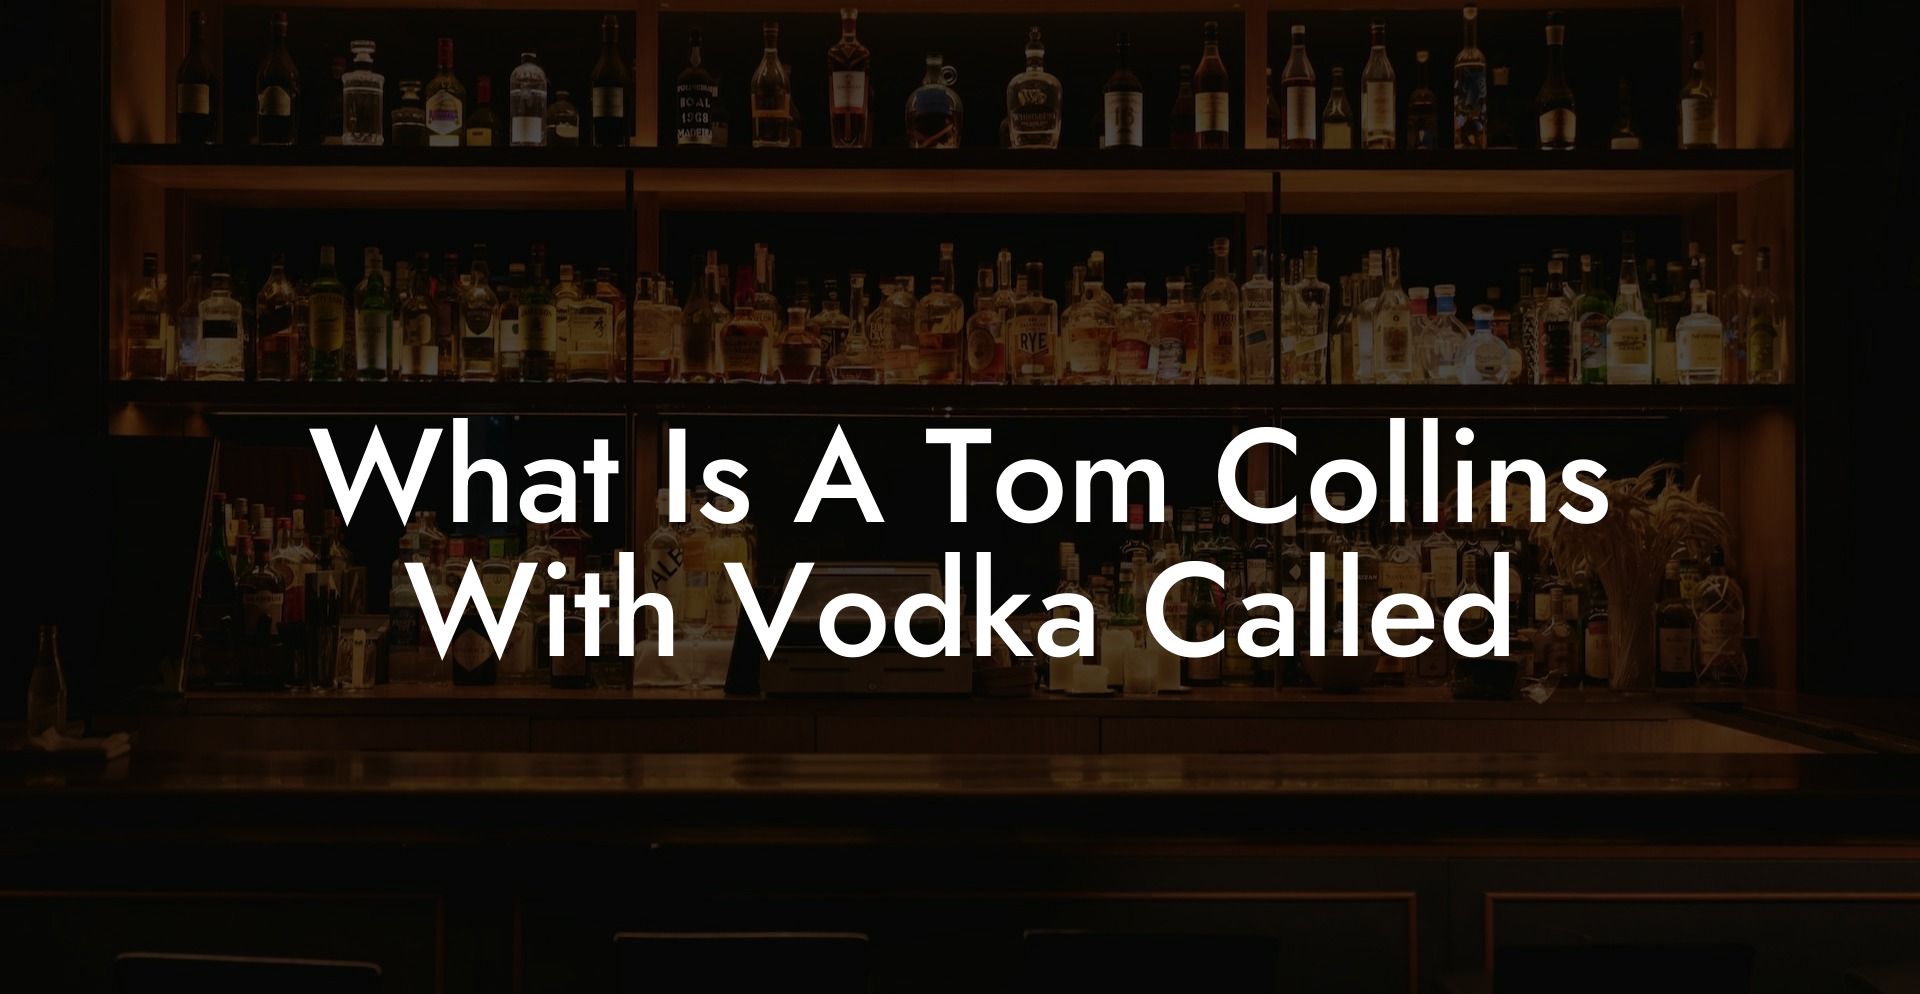 What Is A Tom Collins With Vodka Called